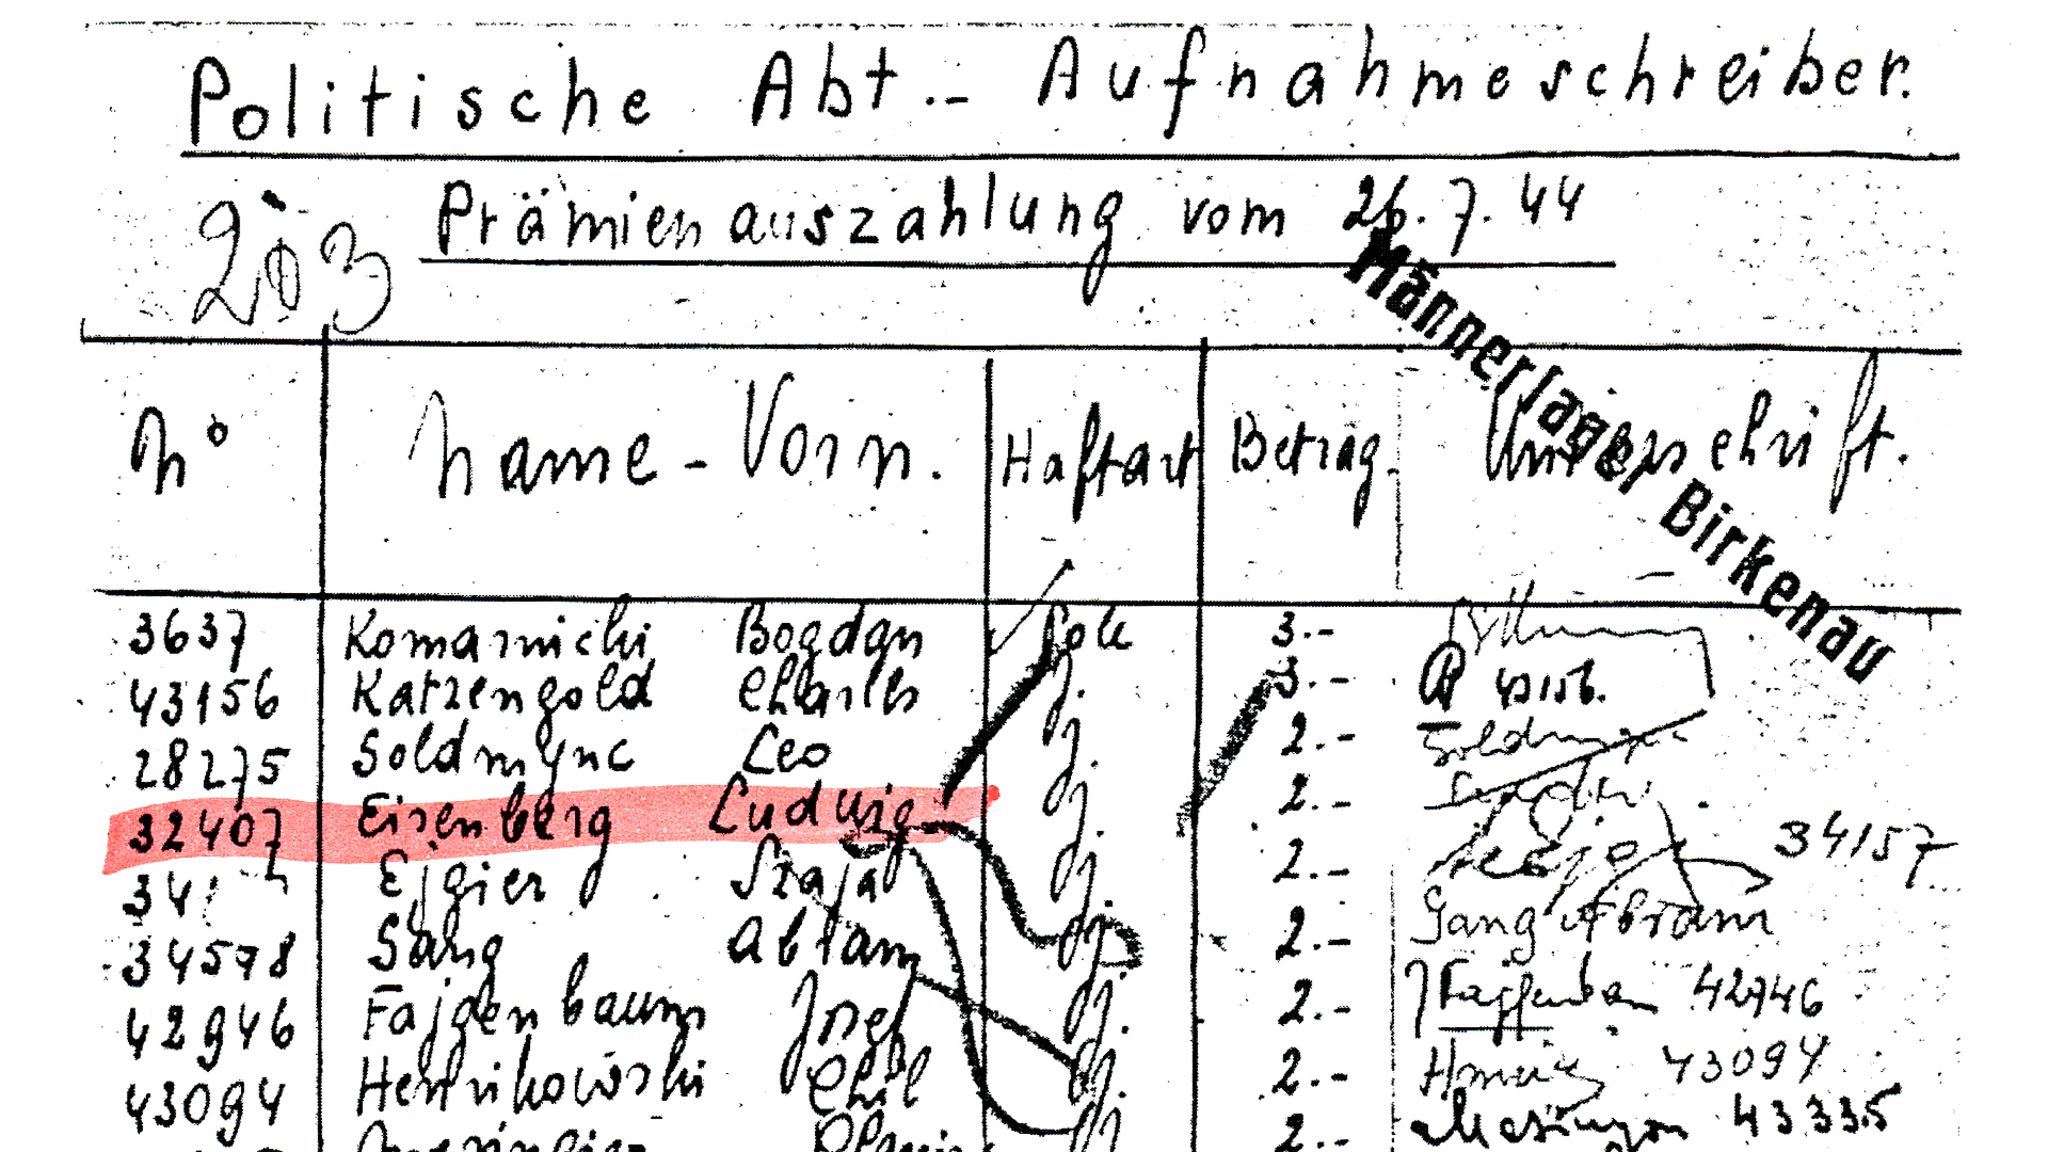 Excerpt of Nazi document showing that Lale Sokolov worked for the SS's political wing